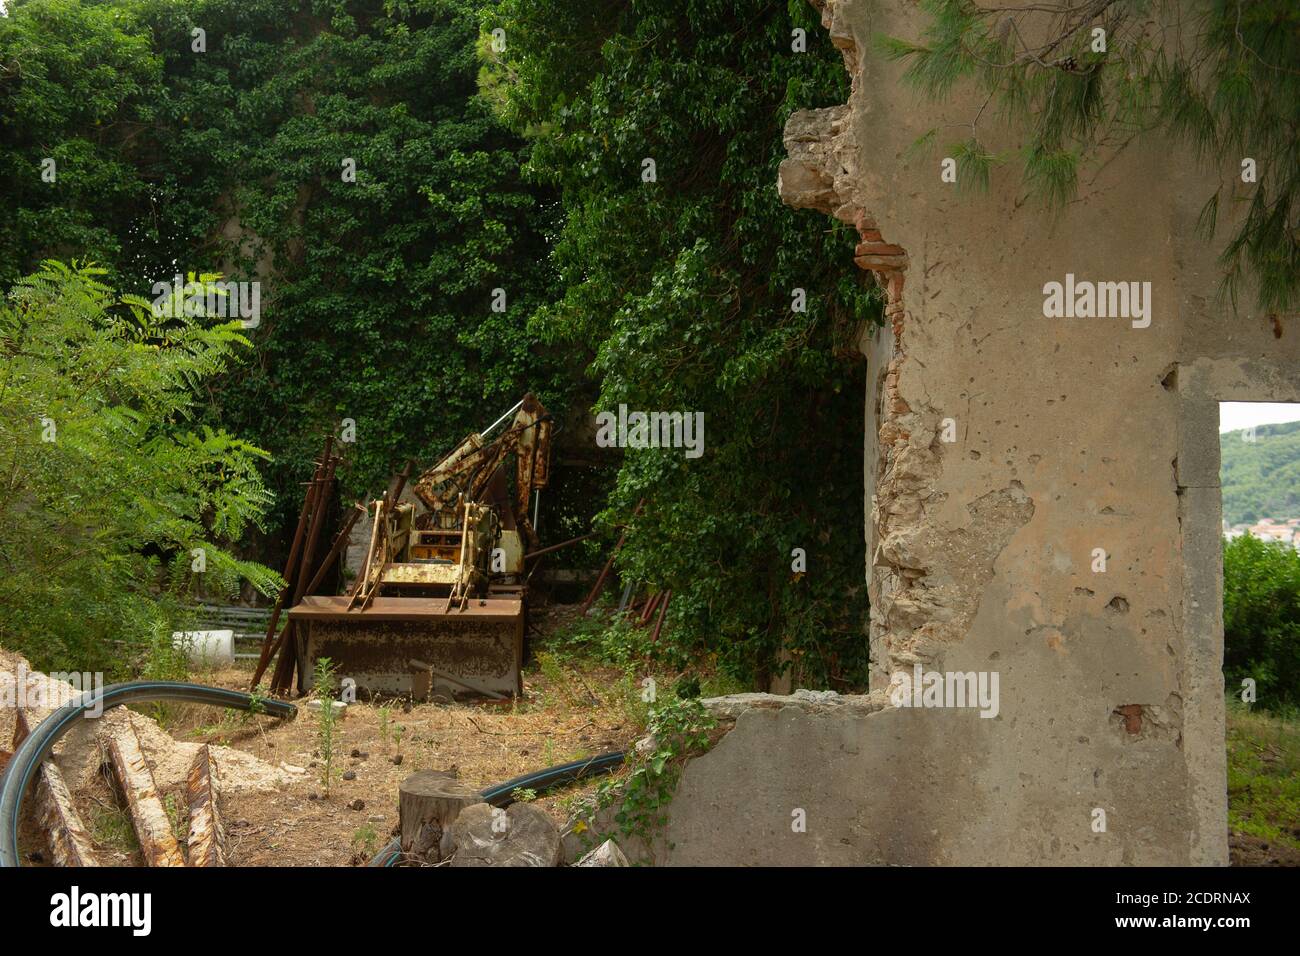 A rusty tractor loader sits abandoned in a collapsed barn. Stock Photo